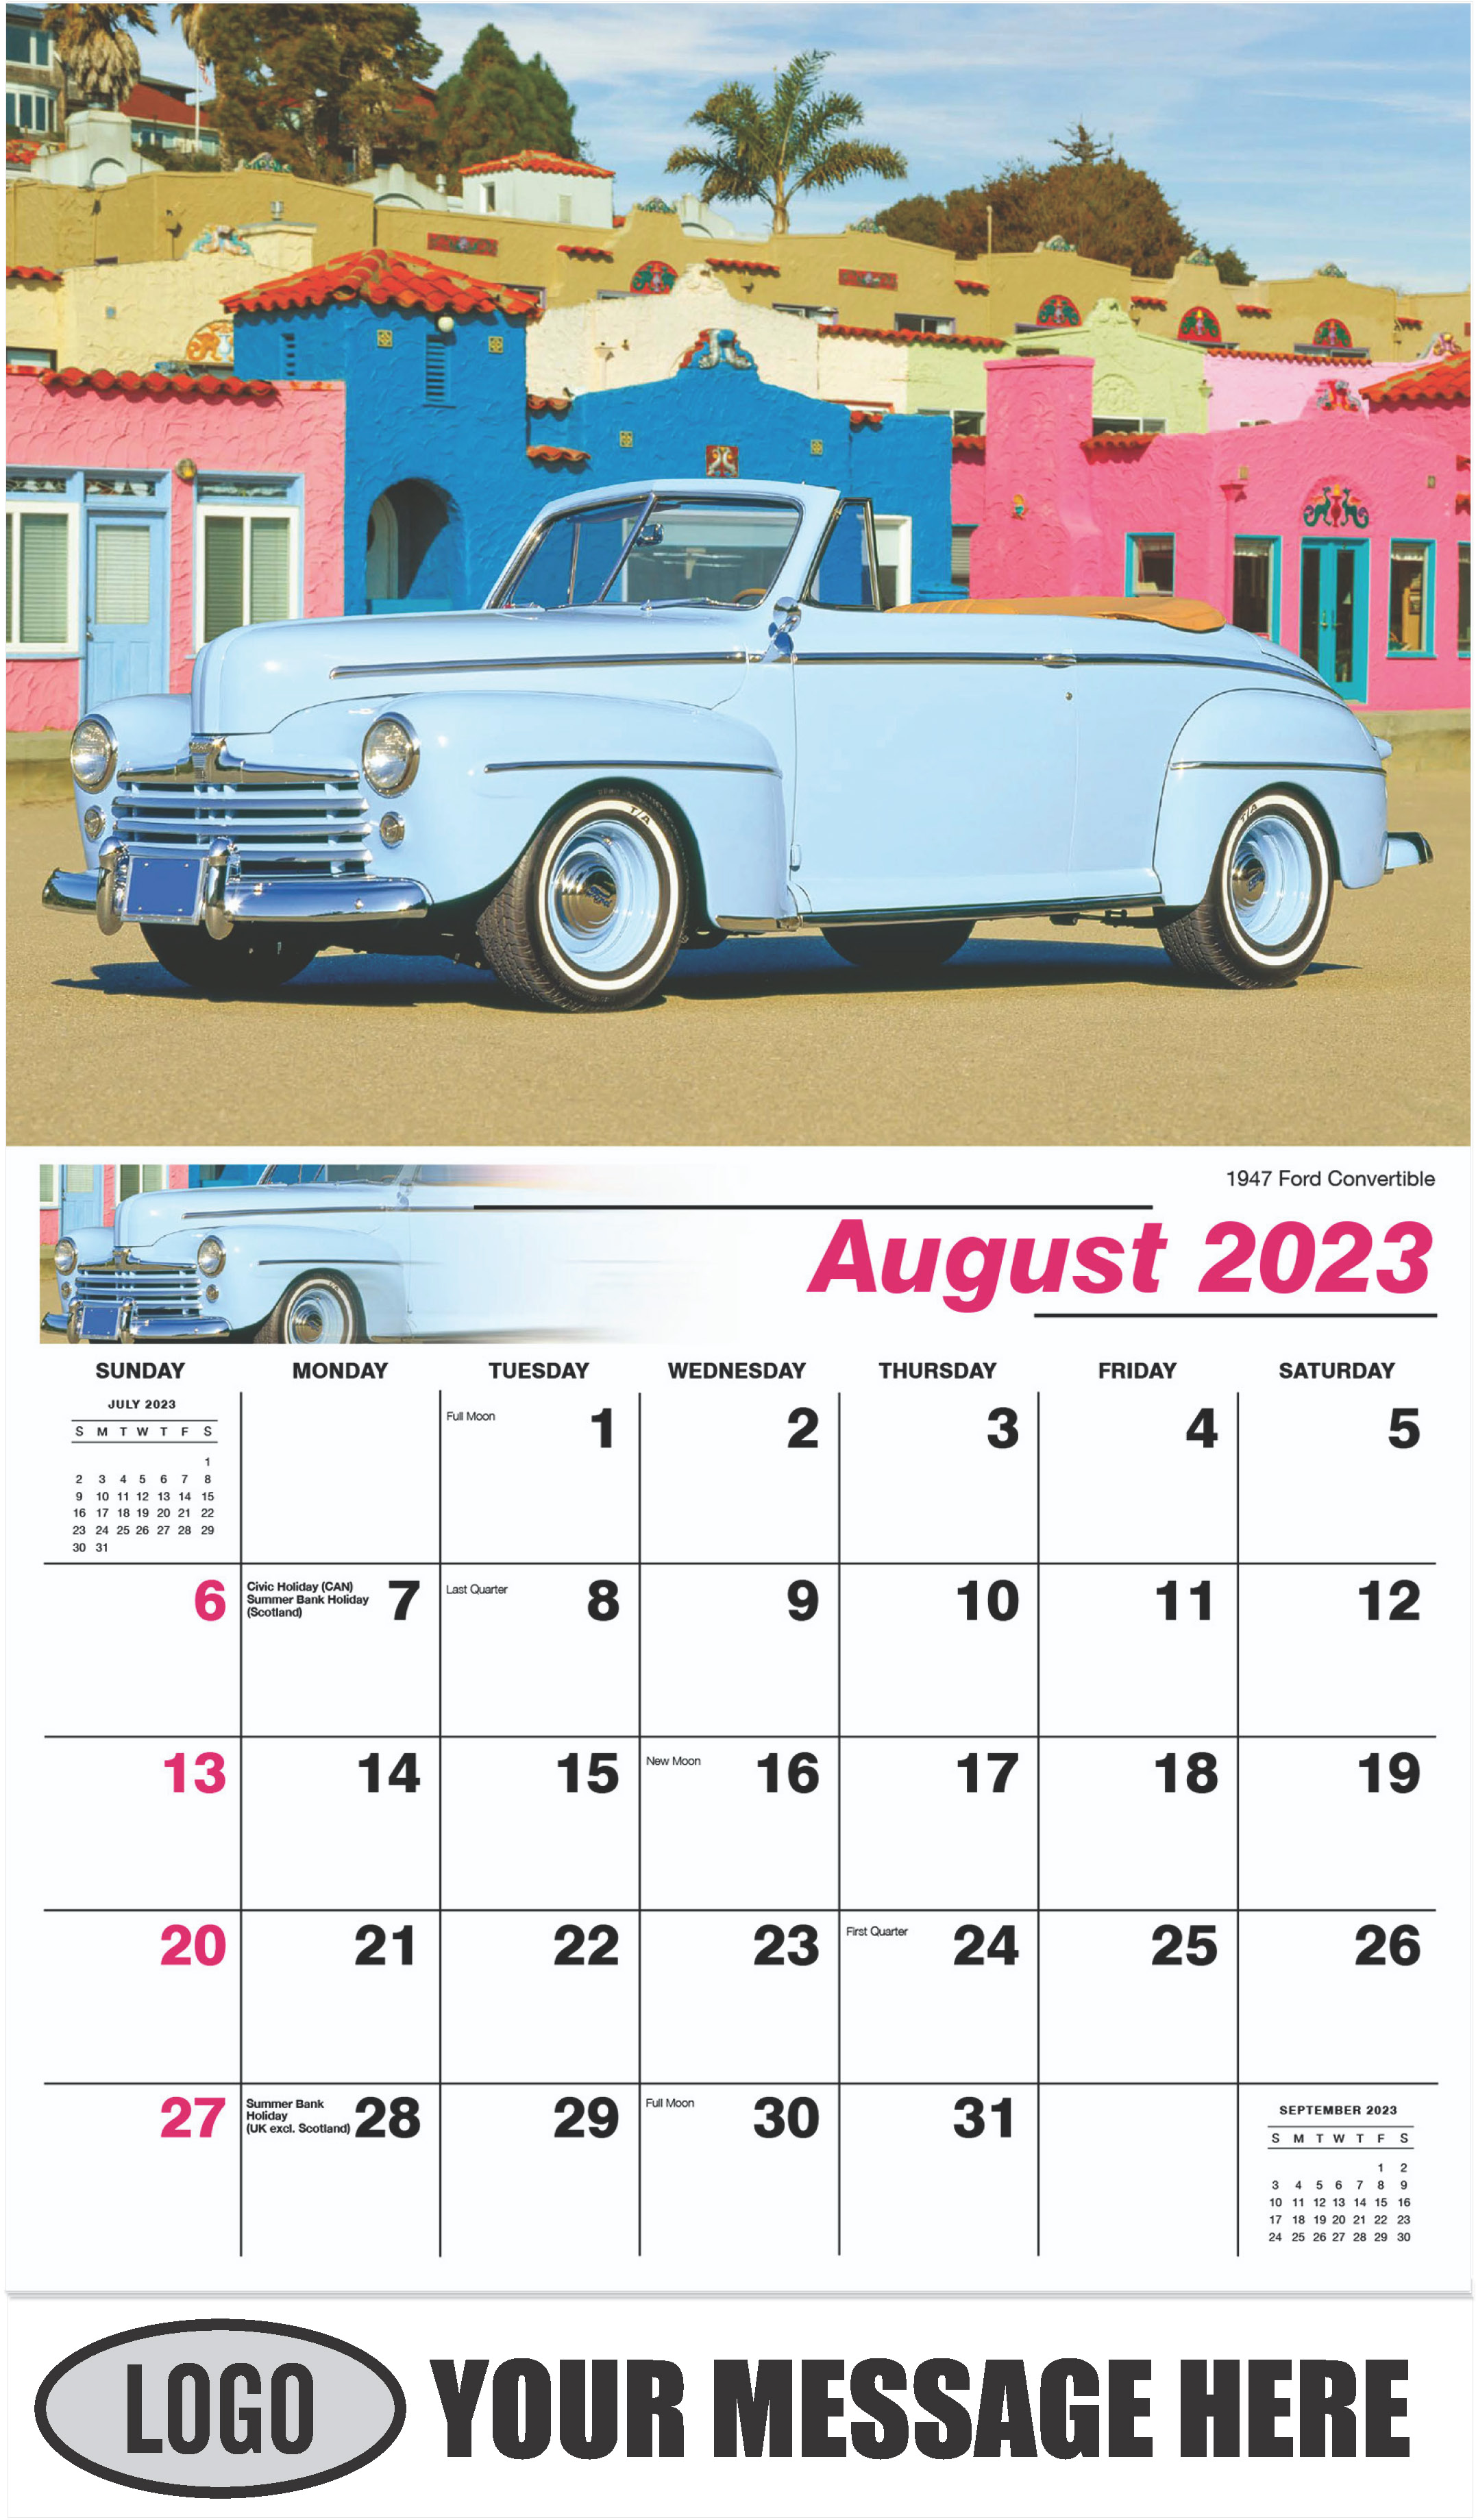 1947 Ford Convertible - August - Henry's Heritage Ford Cars 2023 Promotional Calendar